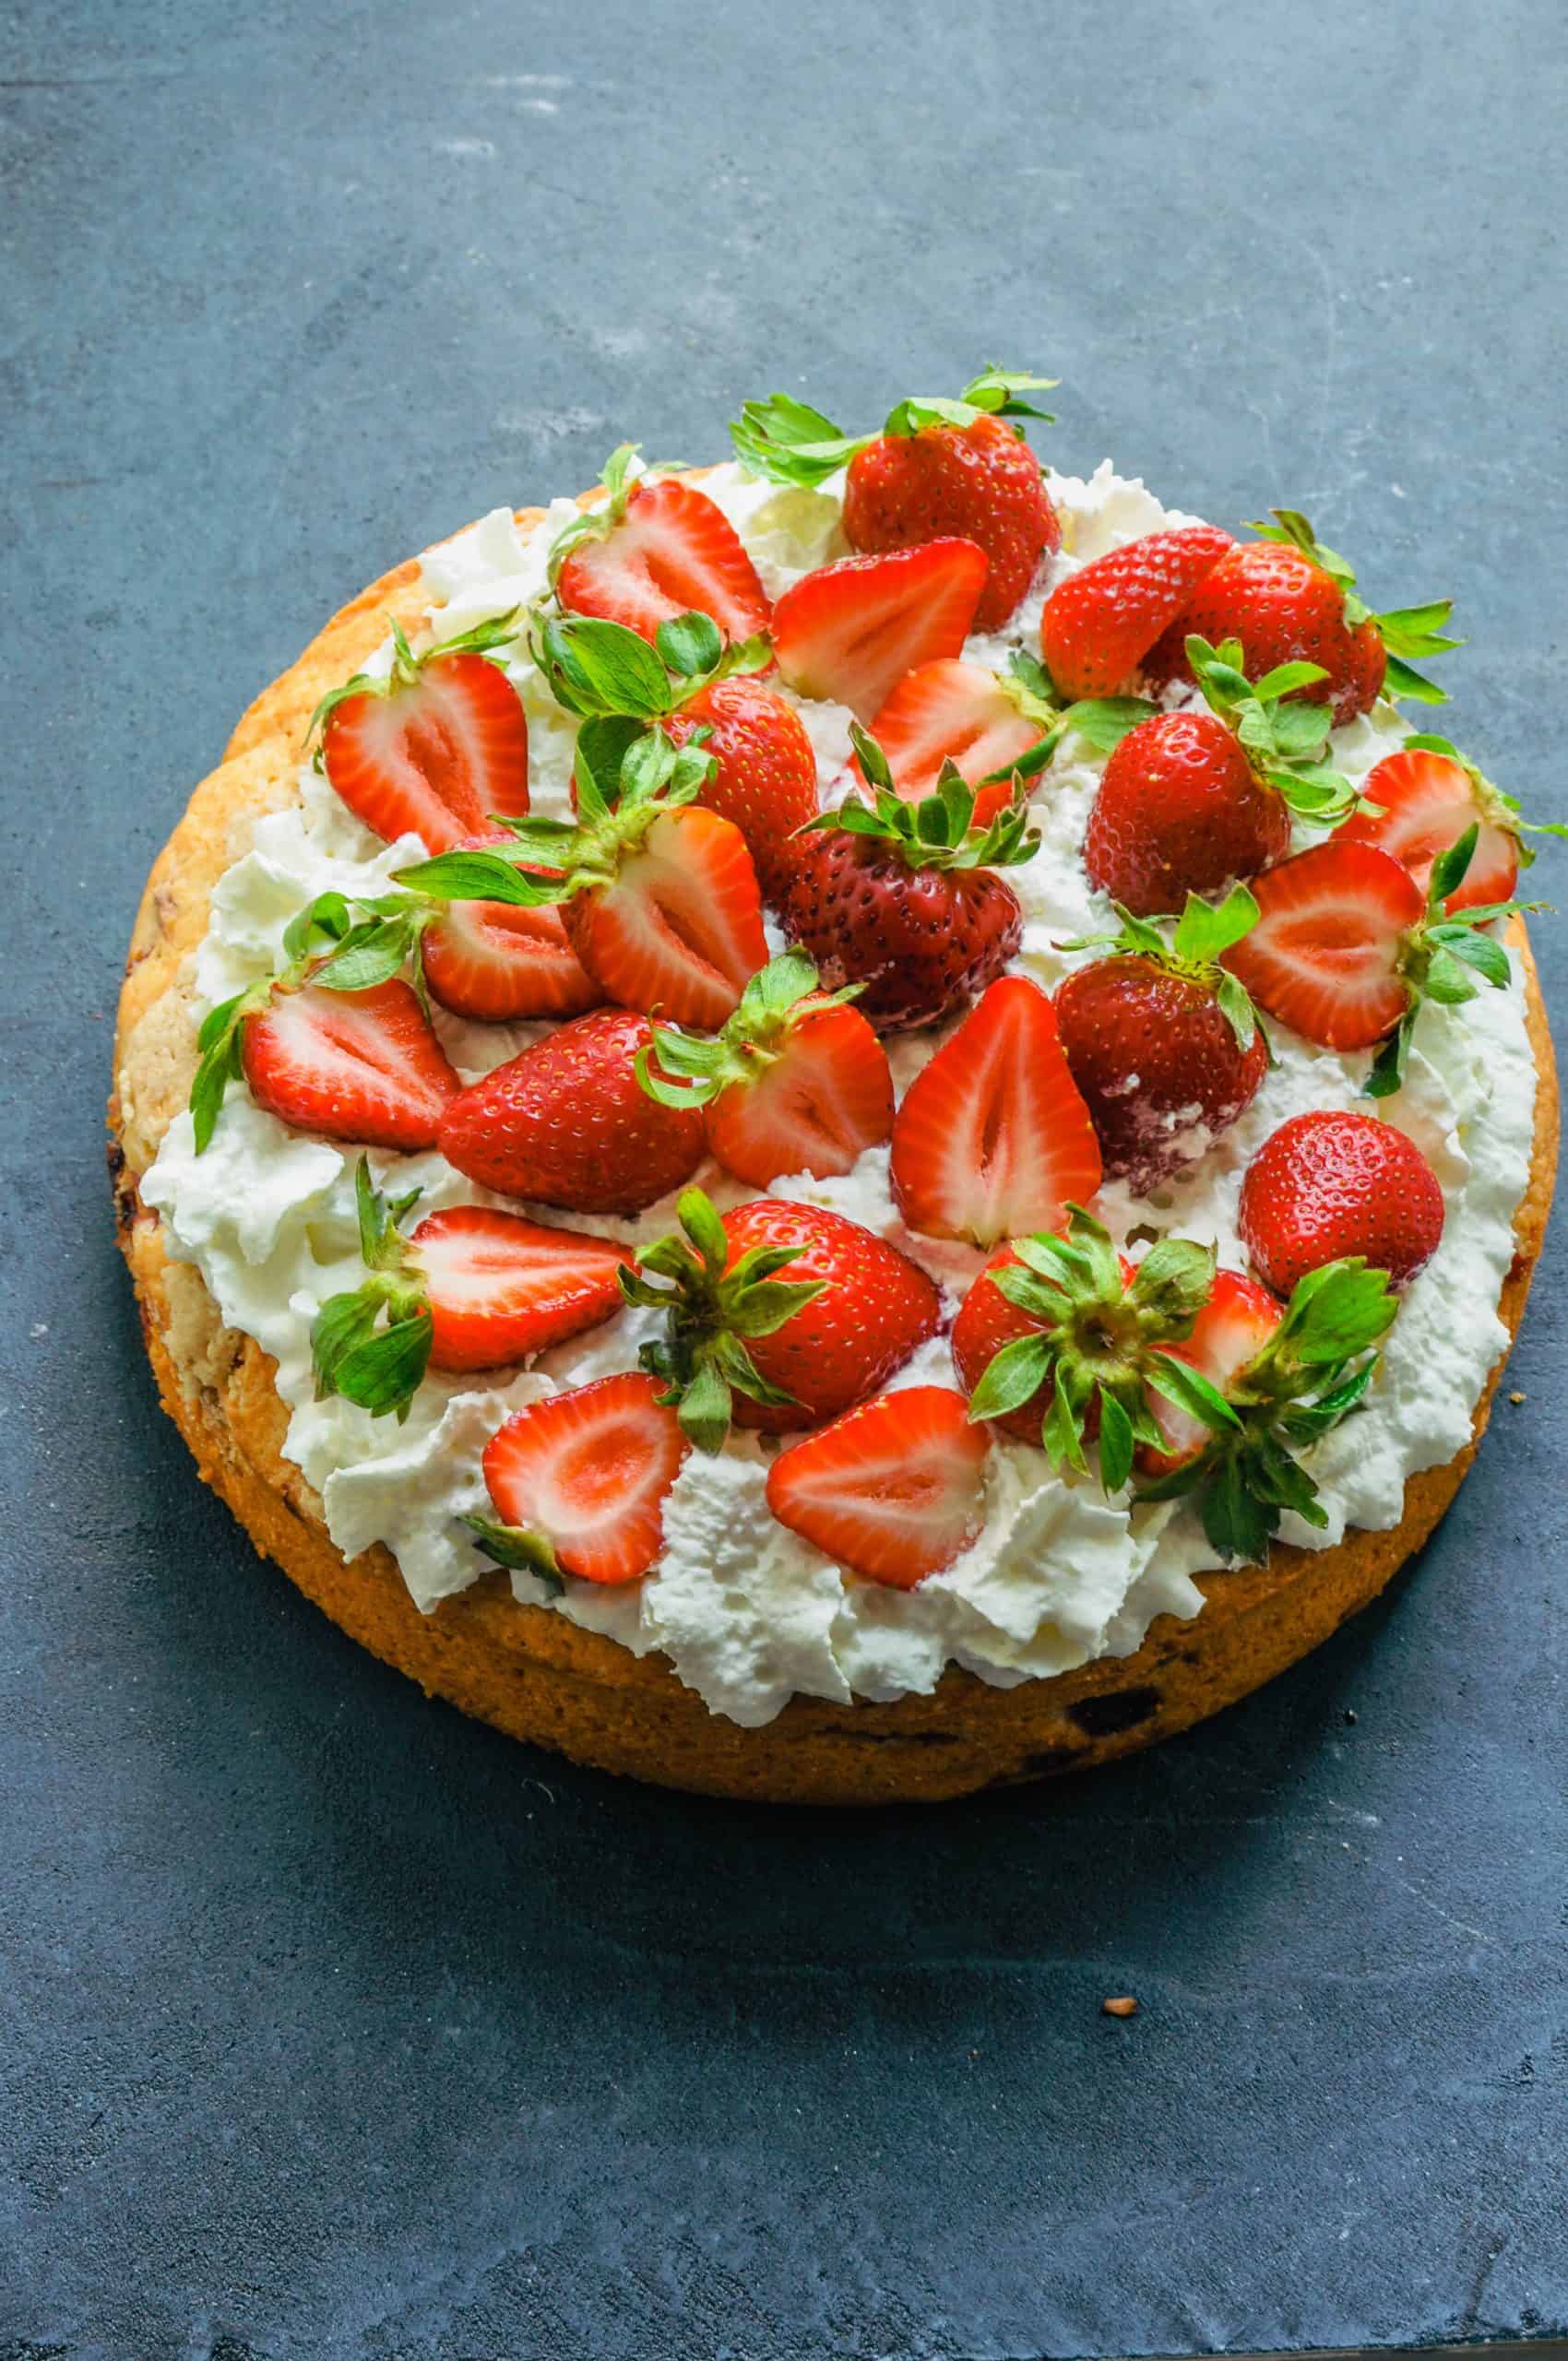 Strawberry tahini cake with strawberries and whip cream on top.